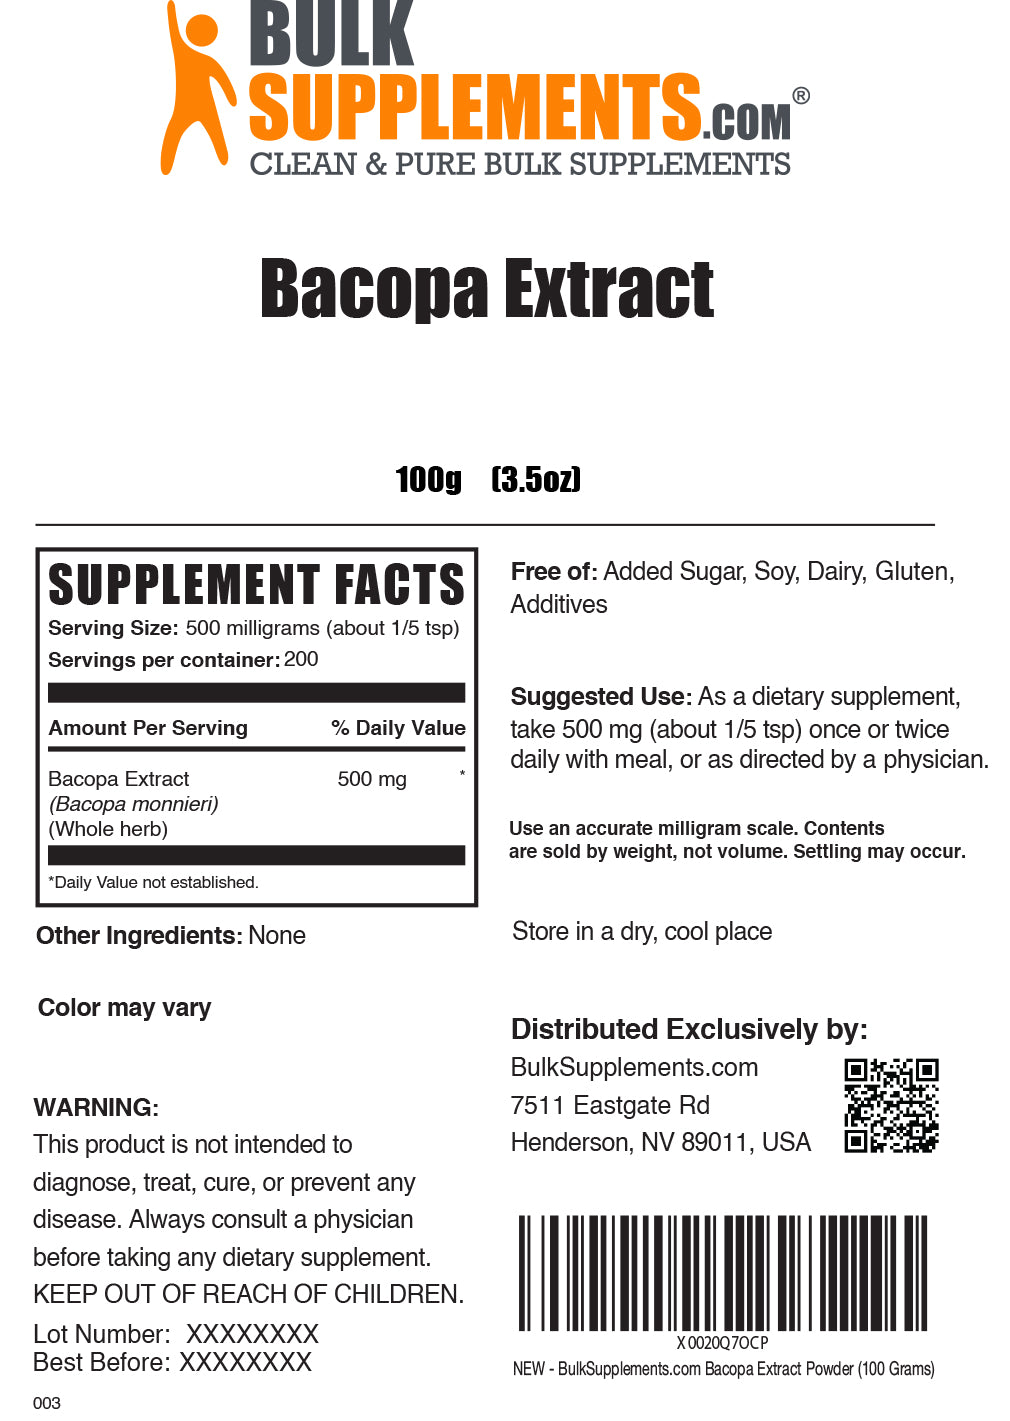 Bacopa extract powder label 100g